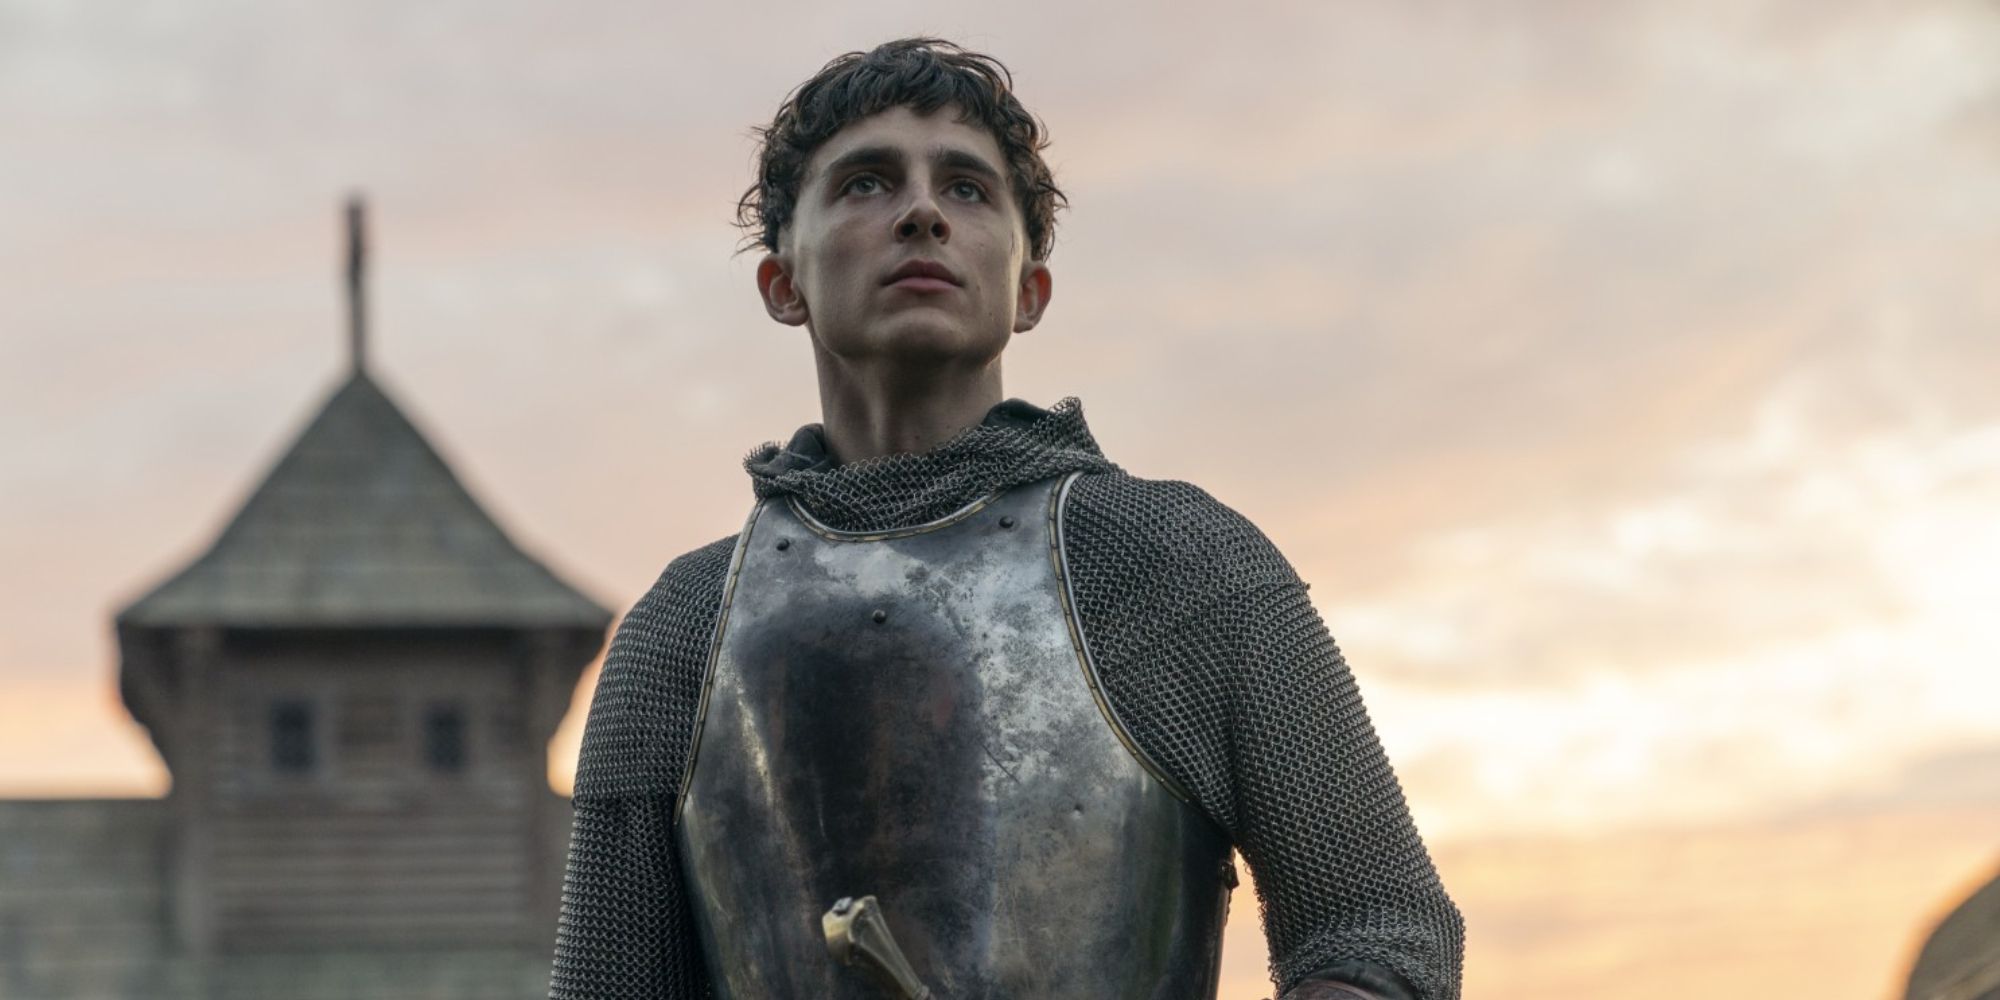 King Arthur, played by Timothee Chalamet in The King